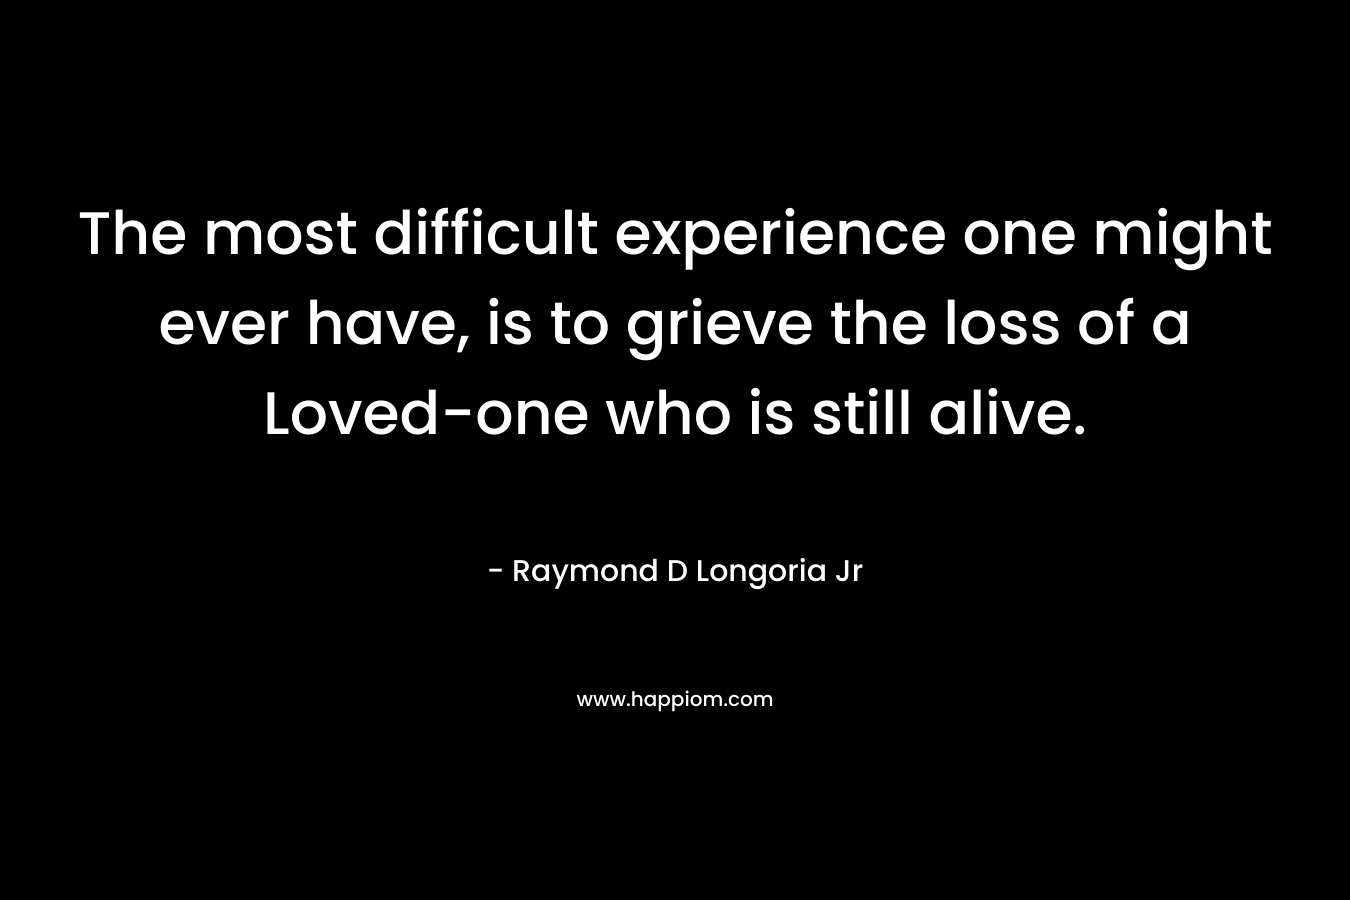 The most difficult experience one might ever have, is to grieve the loss of a Loved-one who is still alive. – Raymond D Longoria Jr